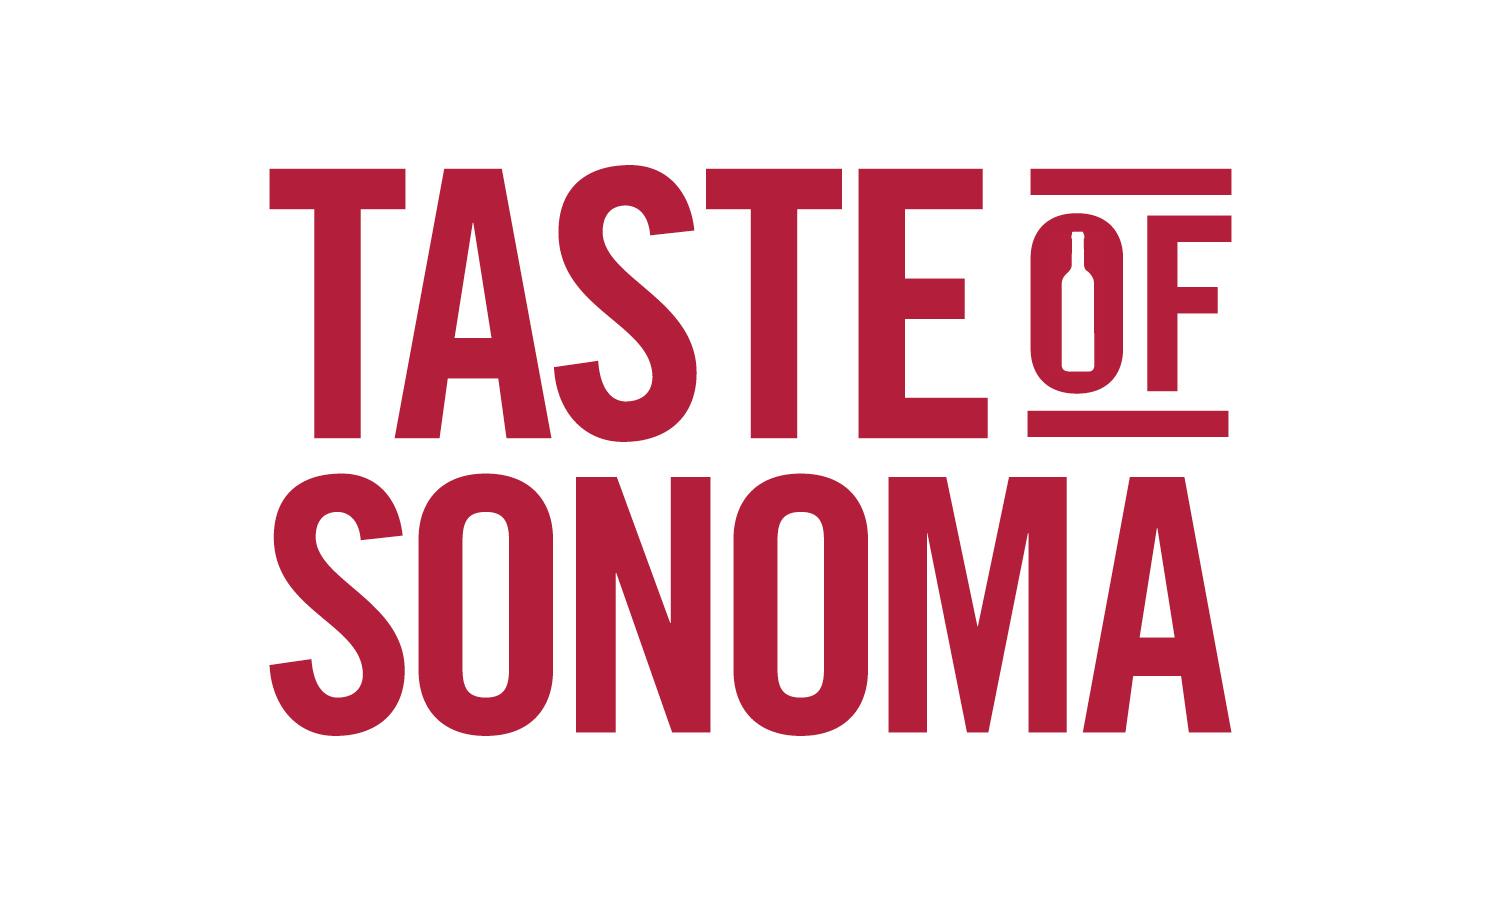 Sonoma Logo - Taste of Sonoma Logos and Banner Image Wine Country Weekend